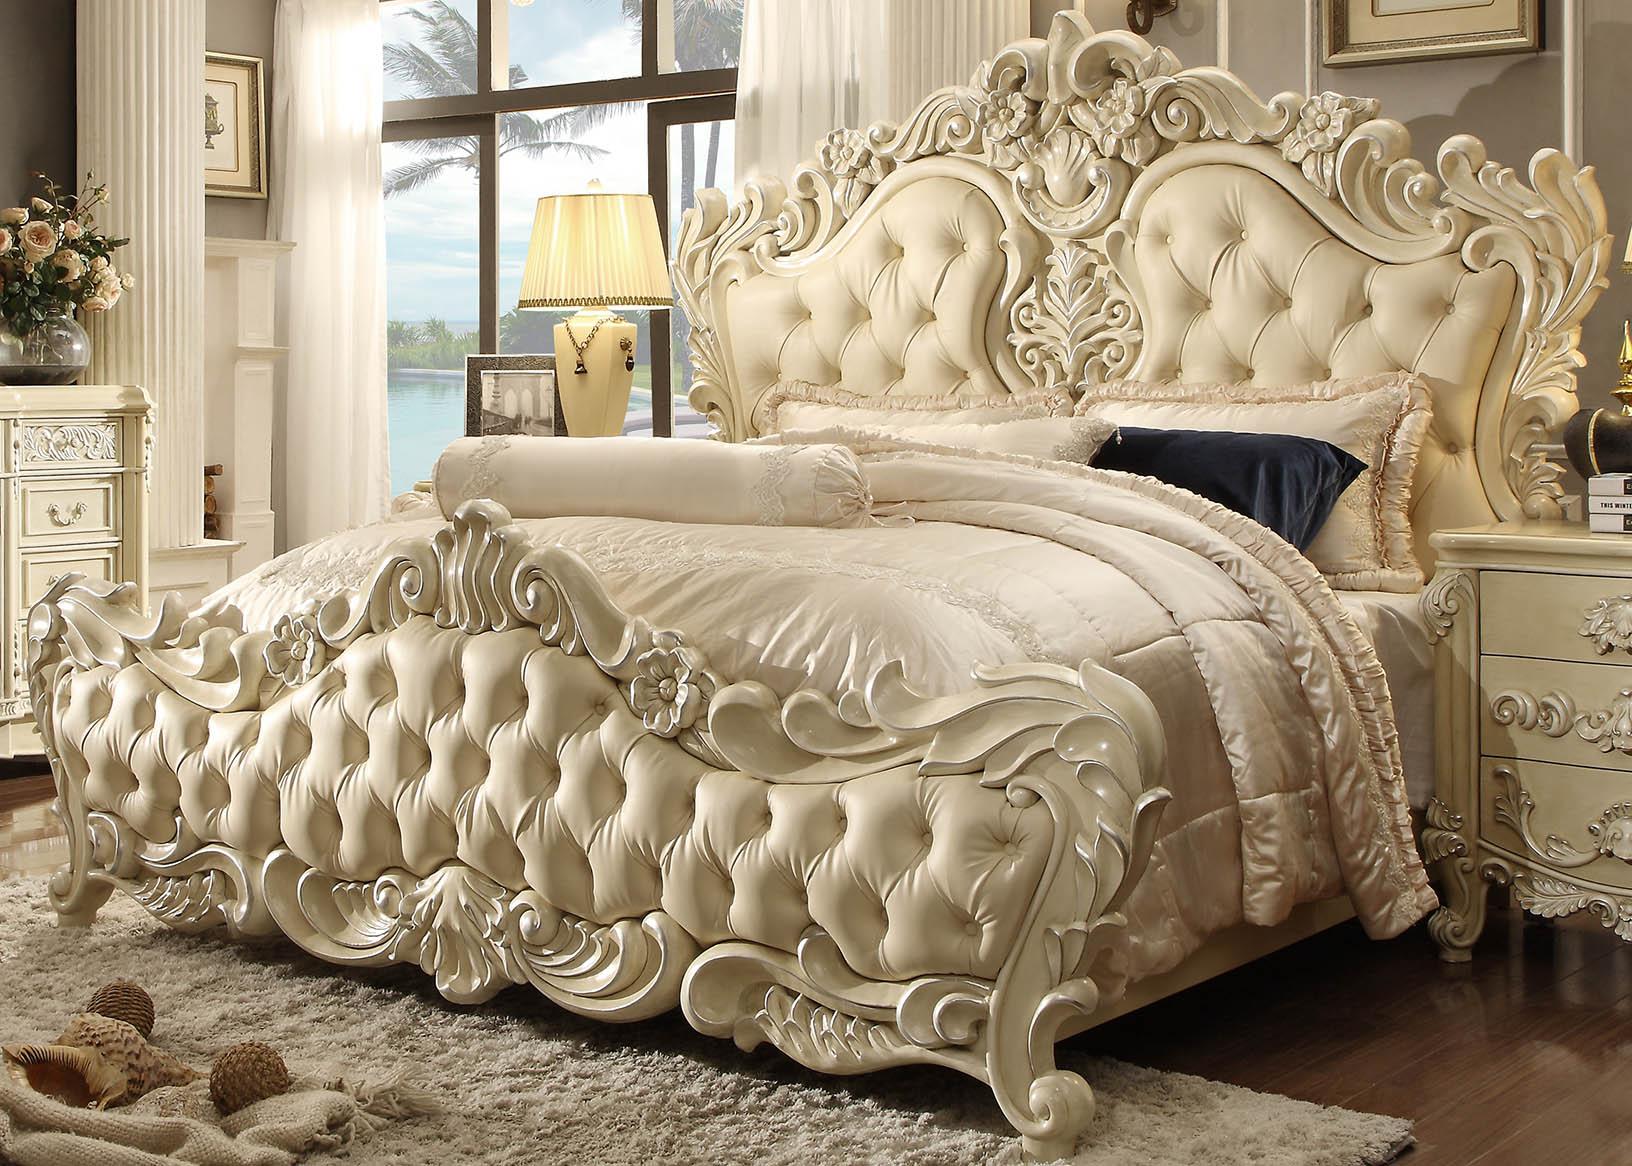 

    
Luxury Pearl Cream Carved Wood King Bed Traditional Homey Design HD-5800
